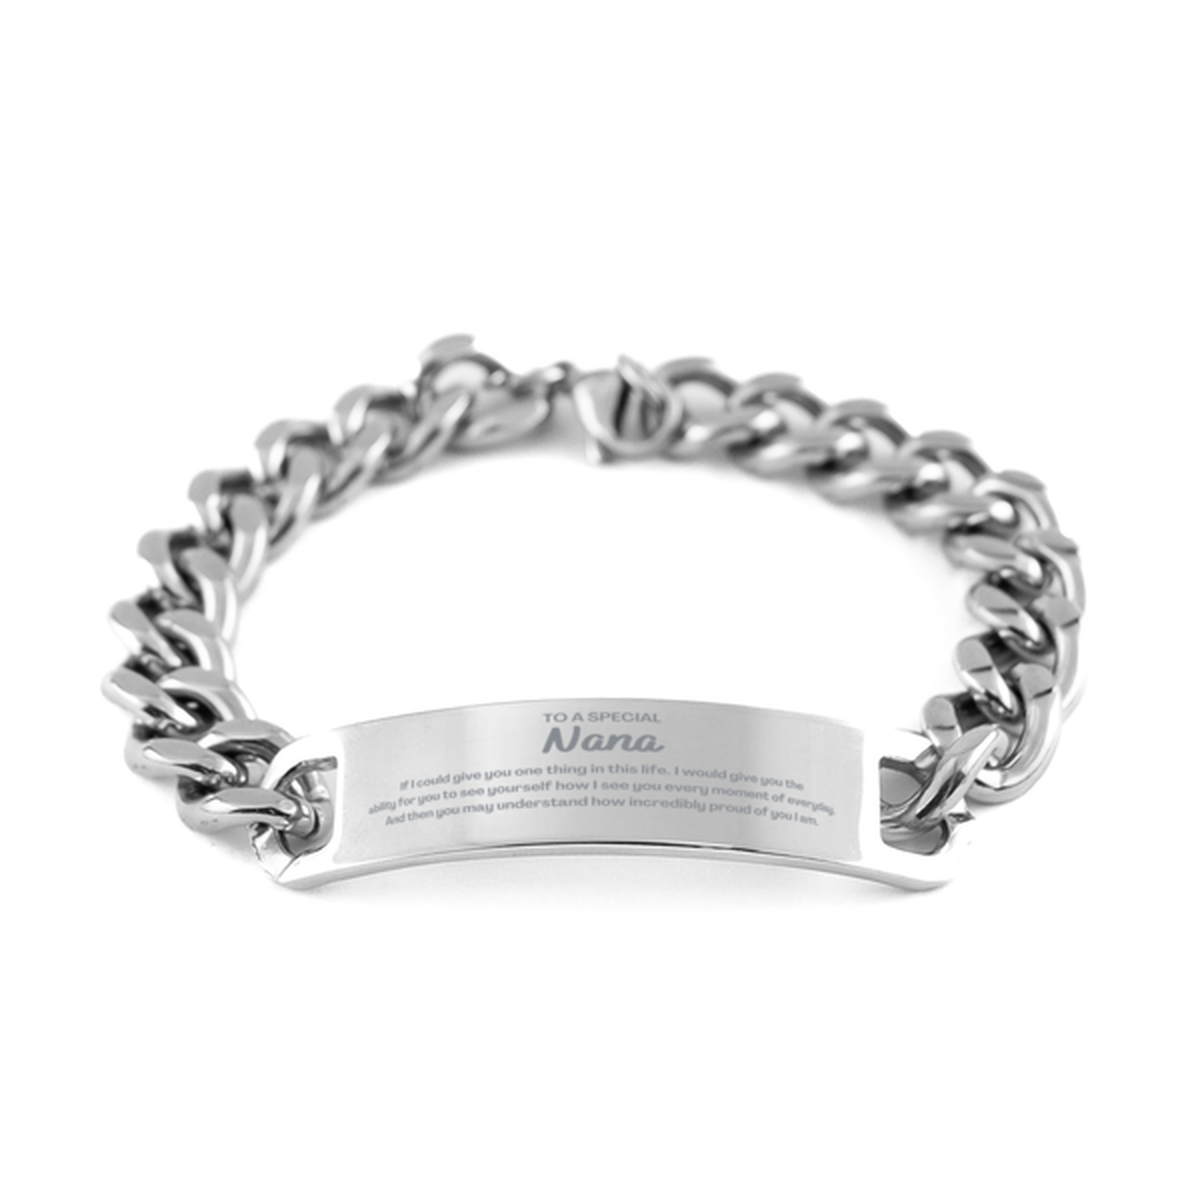 To My Nana Cuban Chain Stainless Steel Bracelet, Gifts For Nana Engraved, Inspirational Gifts for Christmas Birthday, Epic Gifts for Nana To A Special Nana how incredibly proud of you I am